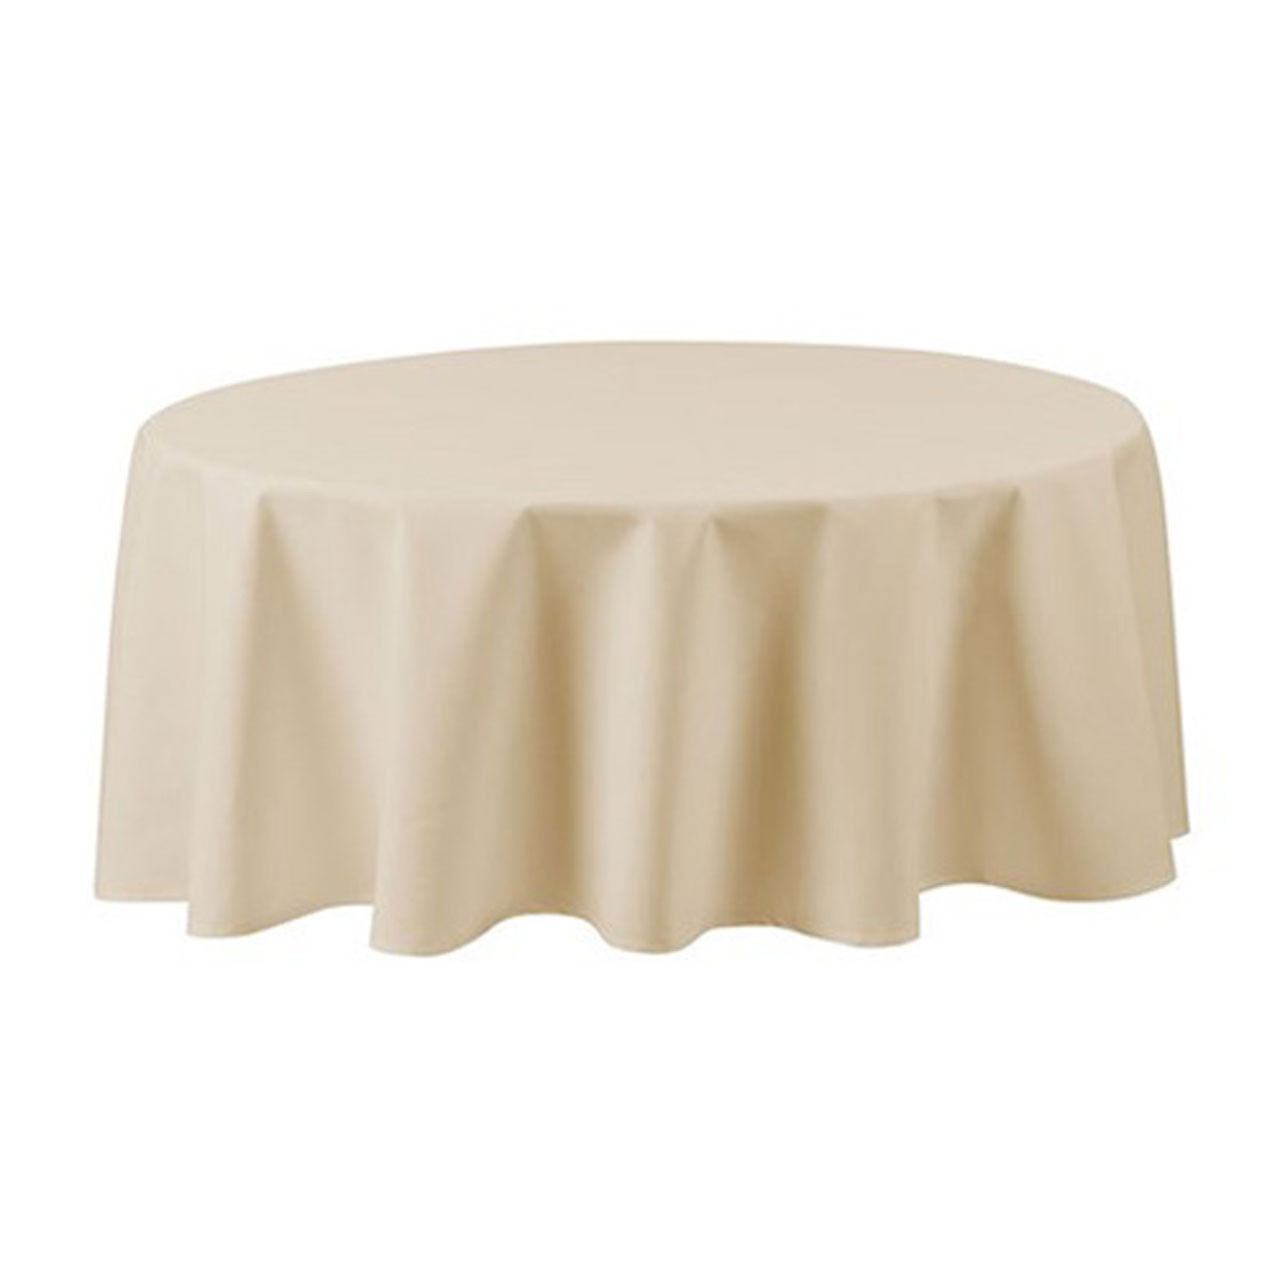 Why are ivory round tablecloths a good investment for my restaurant?